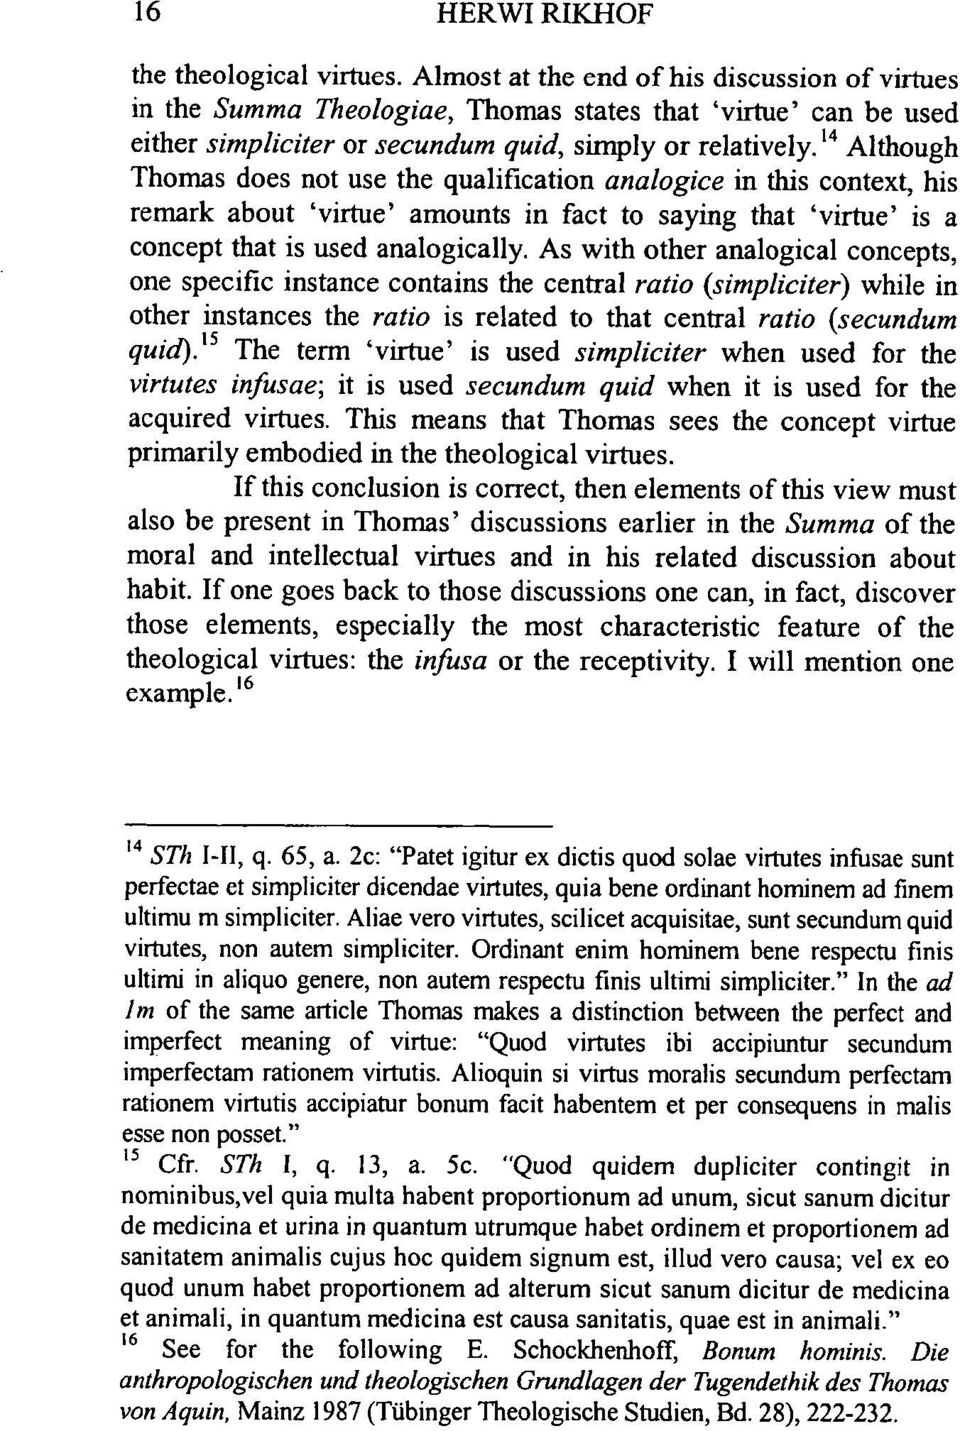 14 Although Thomas does not use the qualification analogice in this context, his remark about 'virtue' amounts in fact to saying that 'virtue' is a concept that is used analogically.